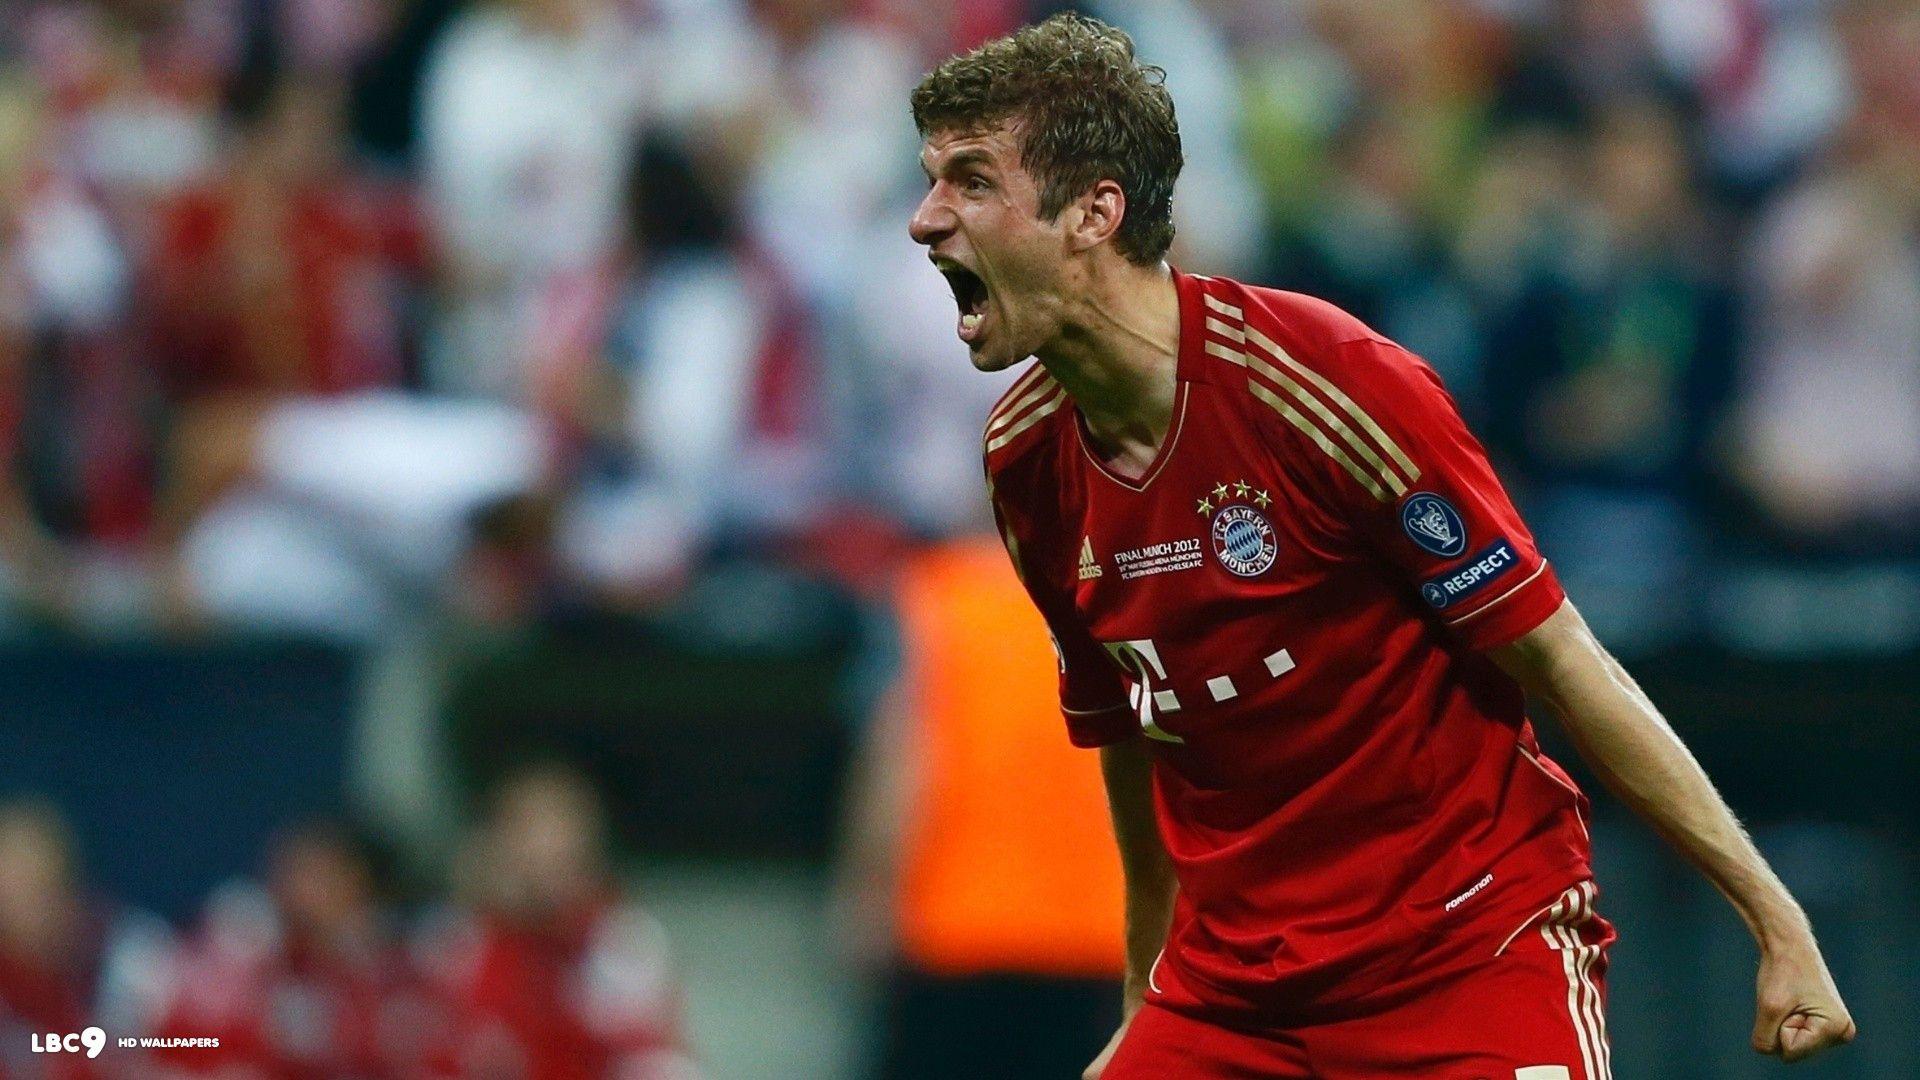 Thomas Muller Wallpaper 3 5. Players HD Background